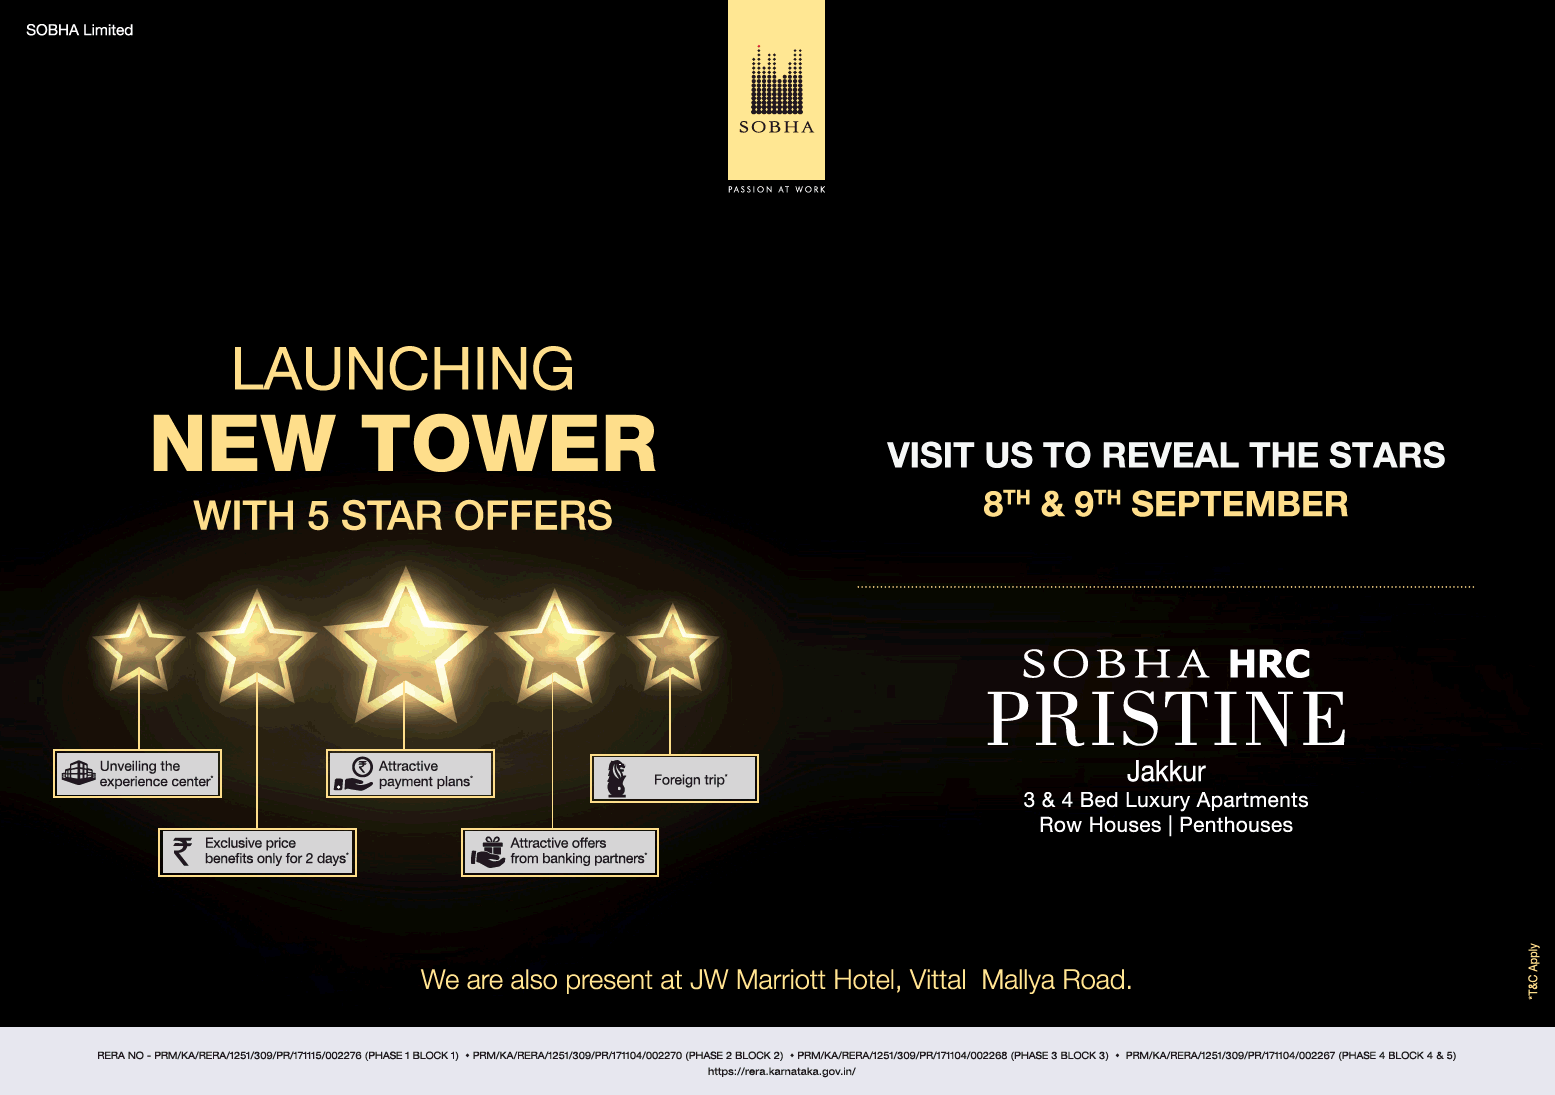 Launching new tower with 5 star offers at Sobha HRC Pristine in Jakkur, Bangalore